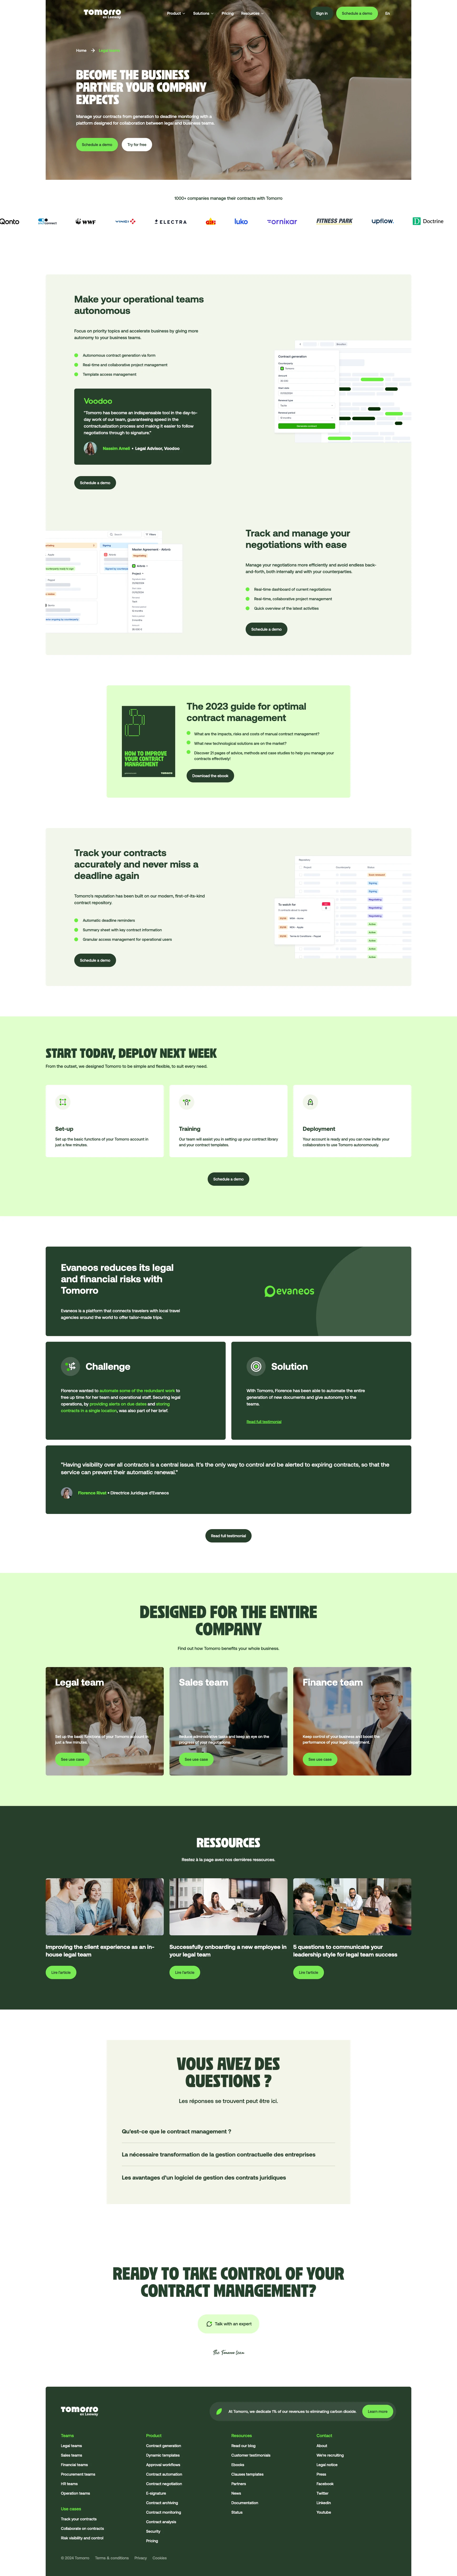 Tomorro Landing Page Example: Tomorro helps you reduce the time spent on contract management and gives you more control and visibility over legal and financial risks.